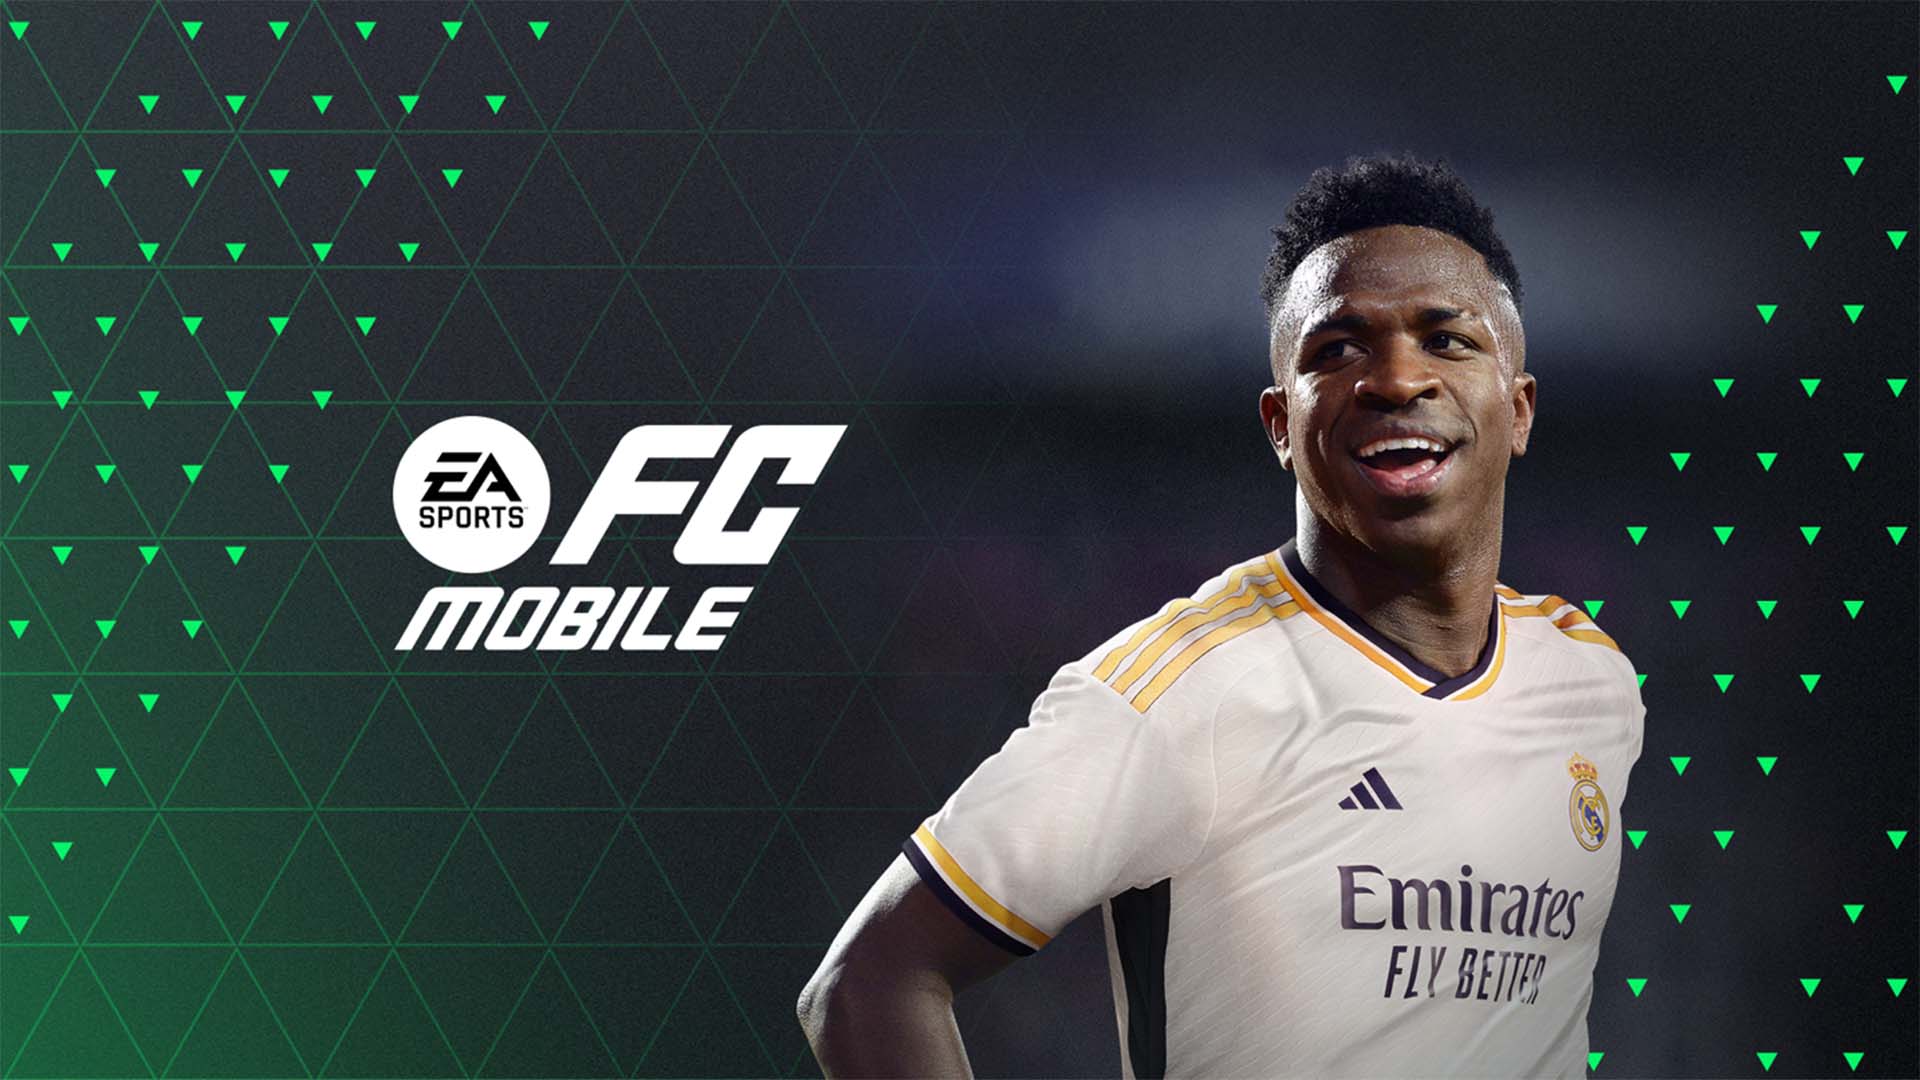 FIFA Mobile Soon to Turn Into FC Mobile With the Real Madrid Star on Its  Cover - EssentiallySports